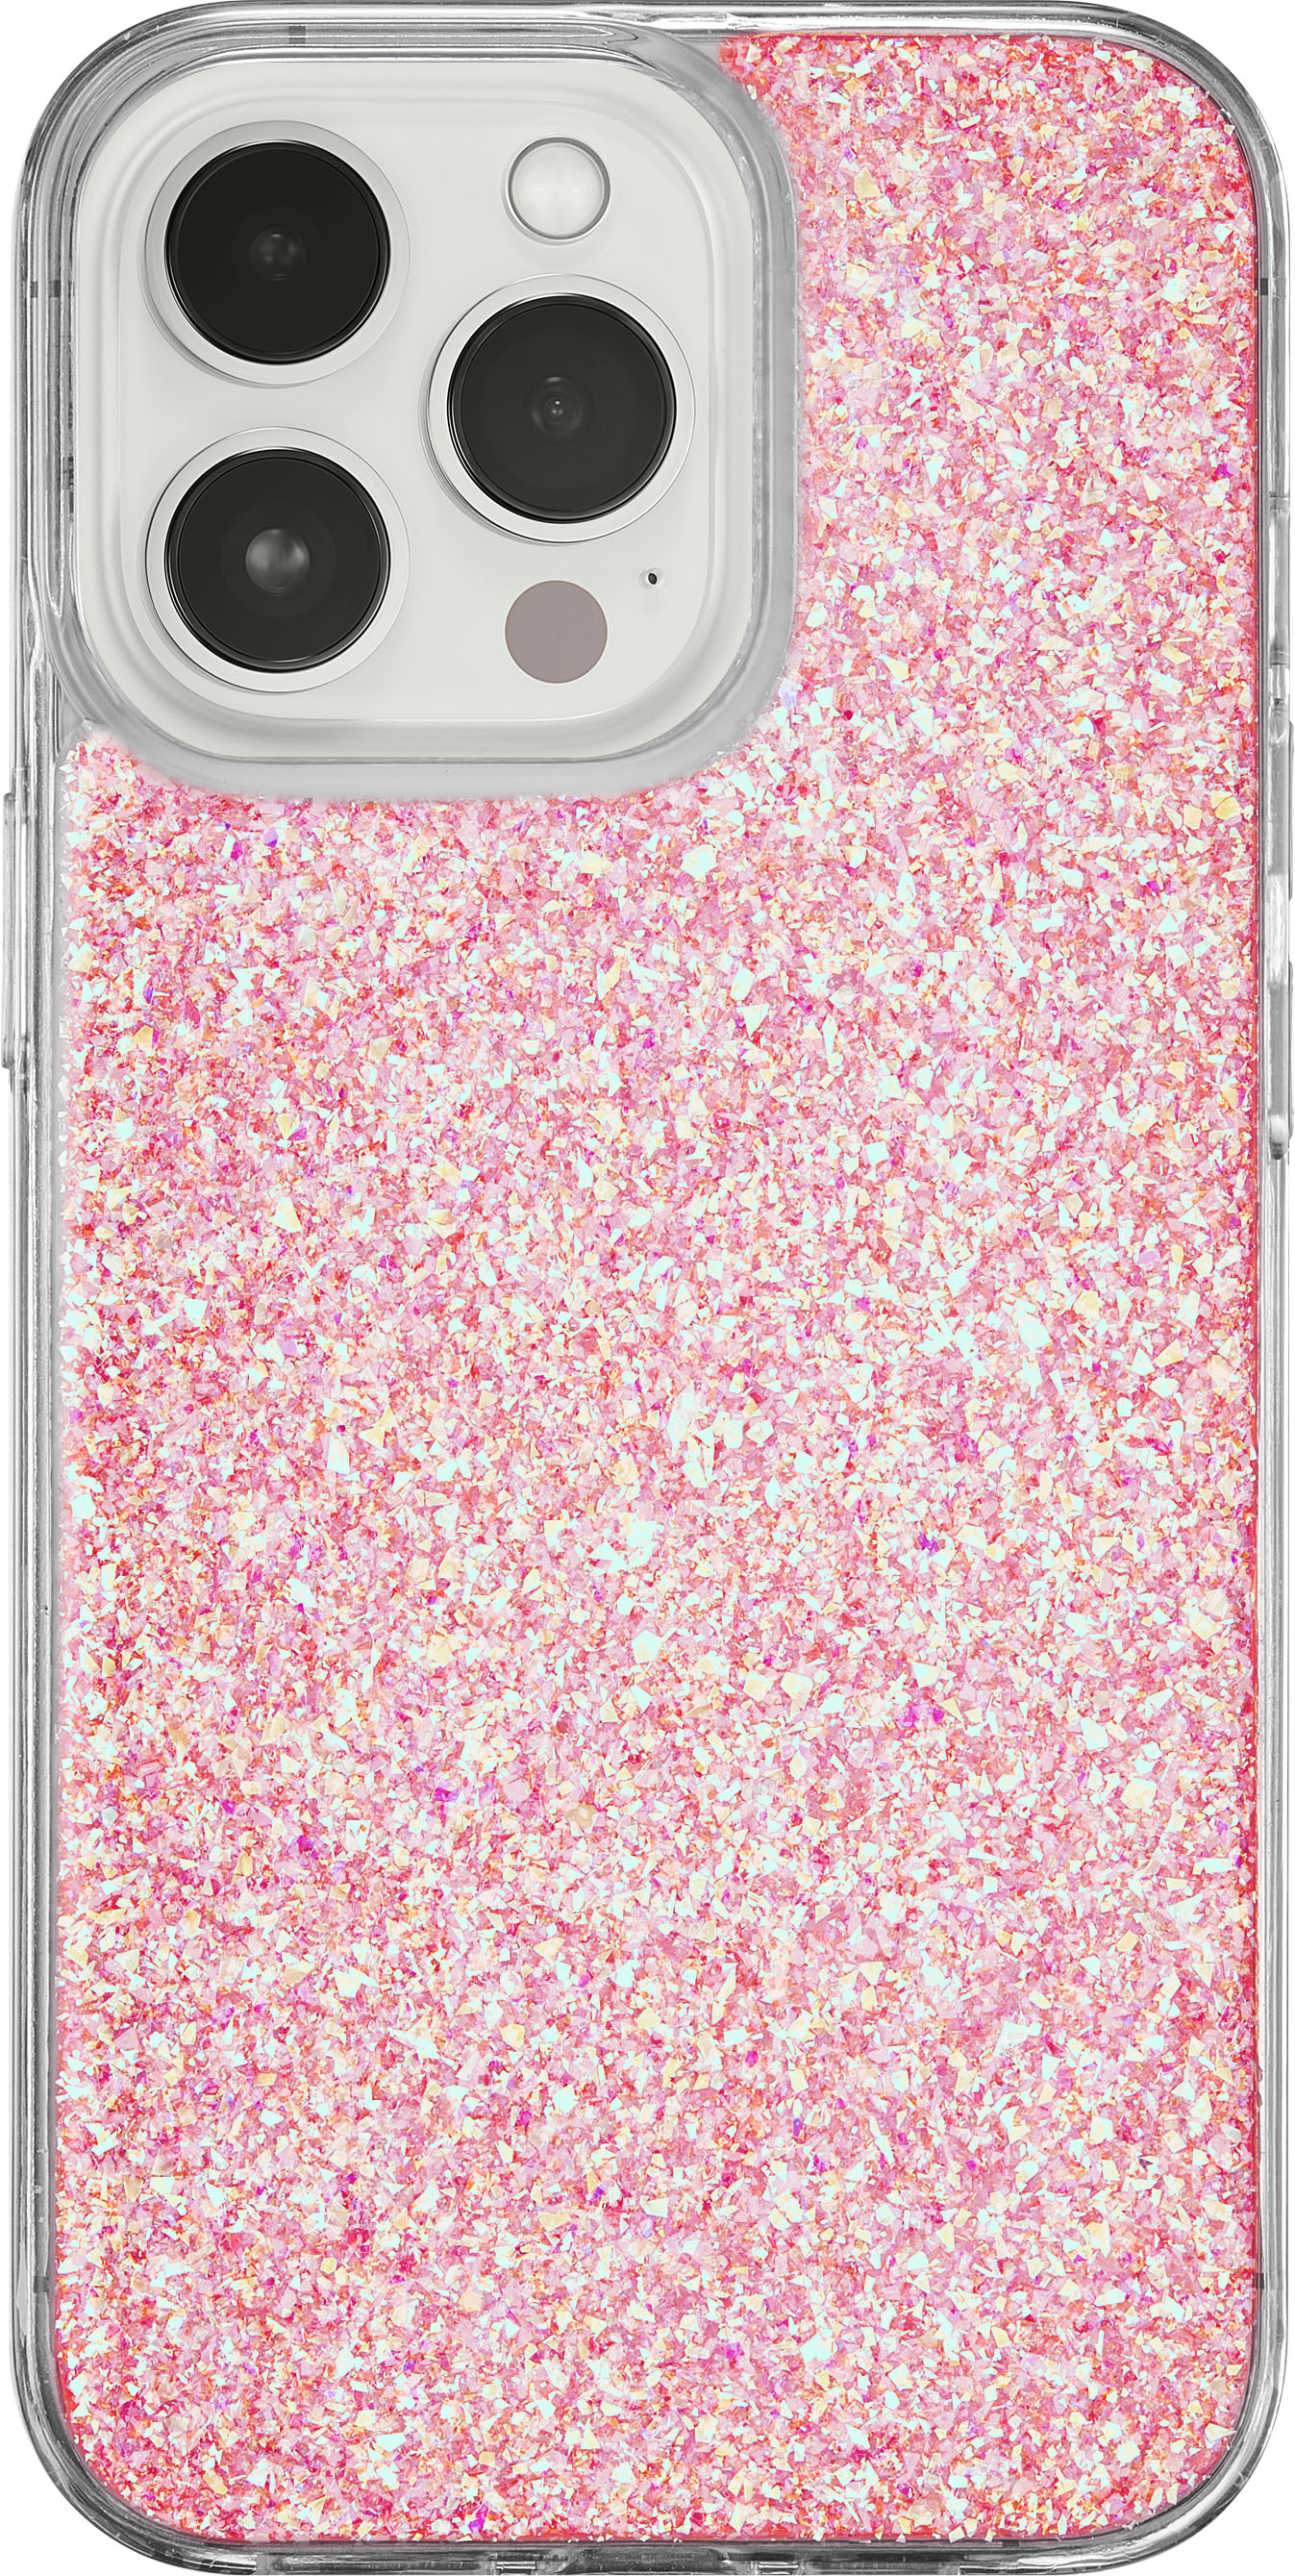 Insignia™ Hard Shell Case for iPhone 13 Pro Intense Glitter NS-PRO13GCT - Buy